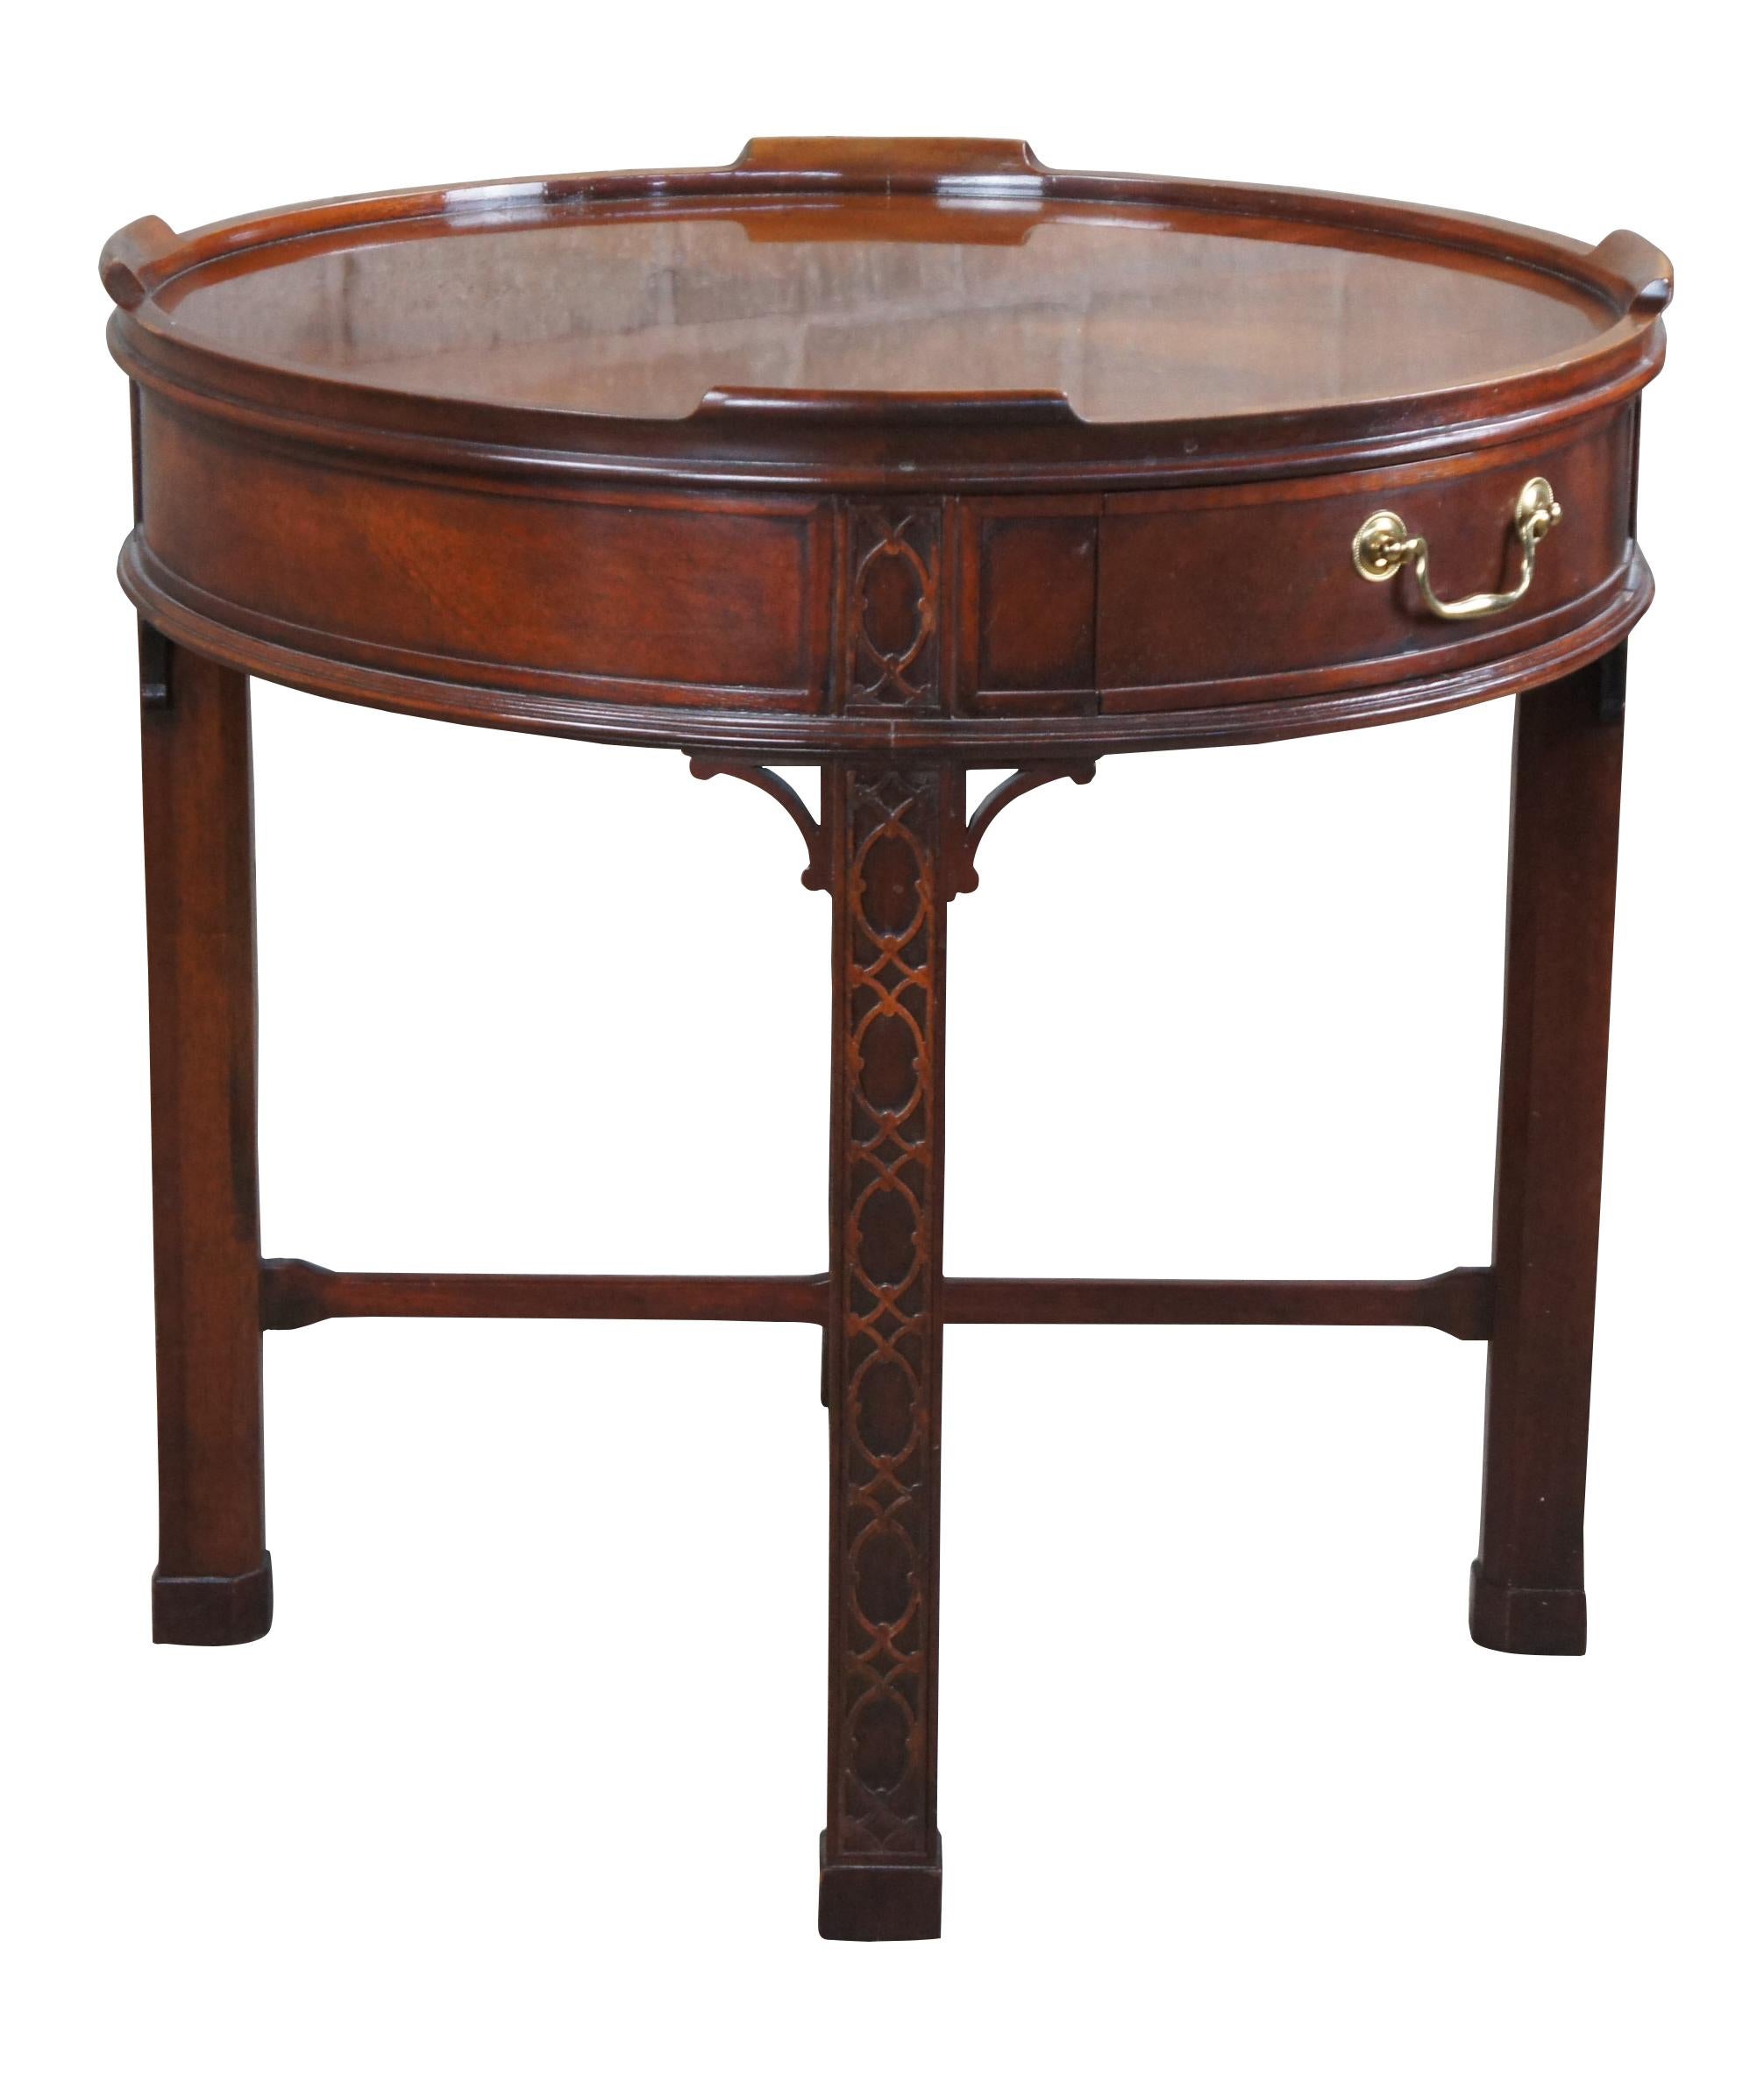 A gorgeous side or accent table by Baker Furniture, Circa last quarter 20th century. Drawing inspiration from English and Chinese Chippendale styling.  Made from mahogany with a matchbook banded inset top.  The frieze features one dovetailed drawer